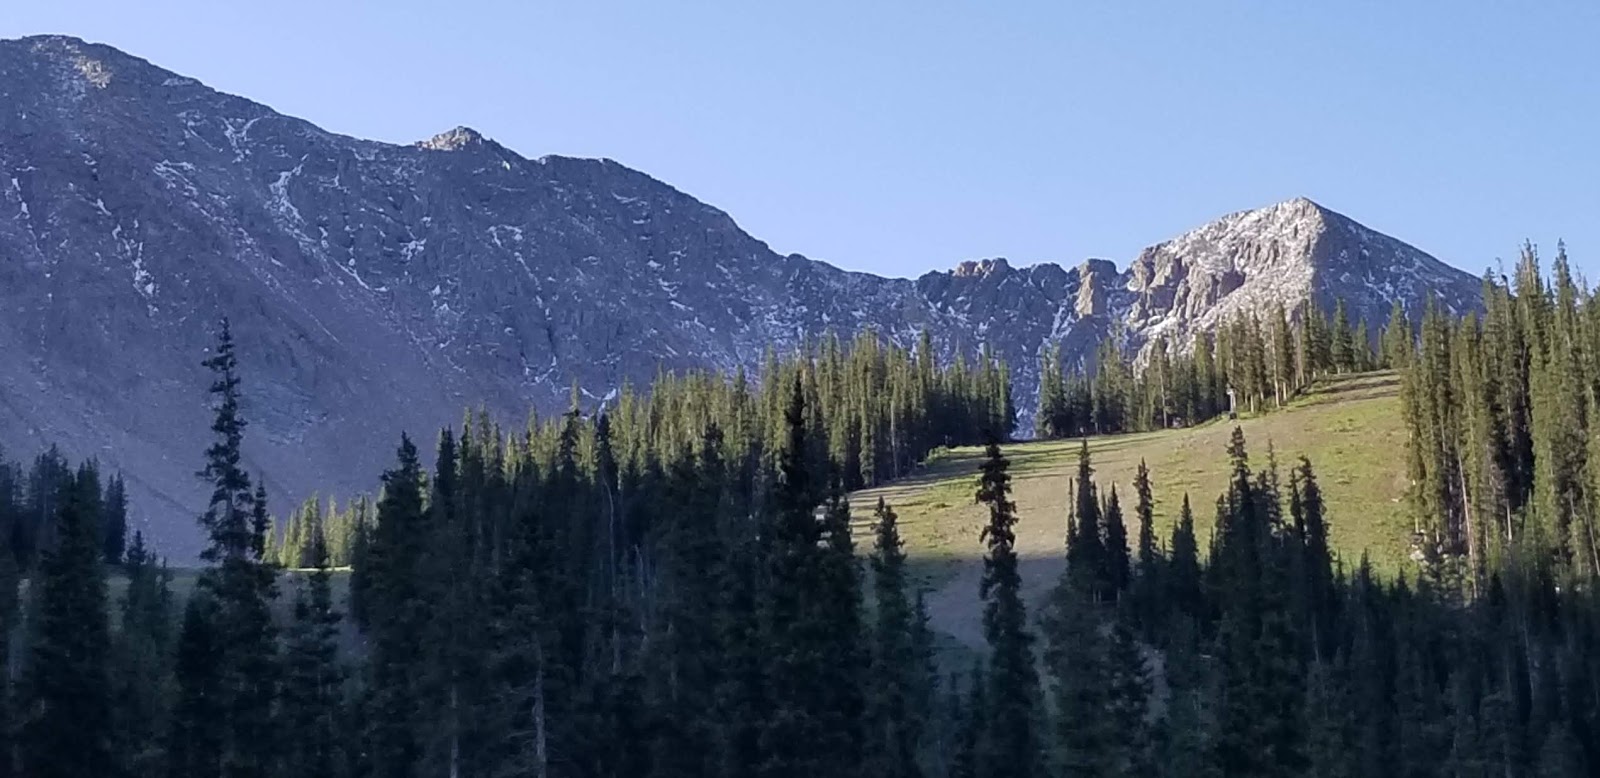 First snow seen high in the mountains., Arapahoe Basin